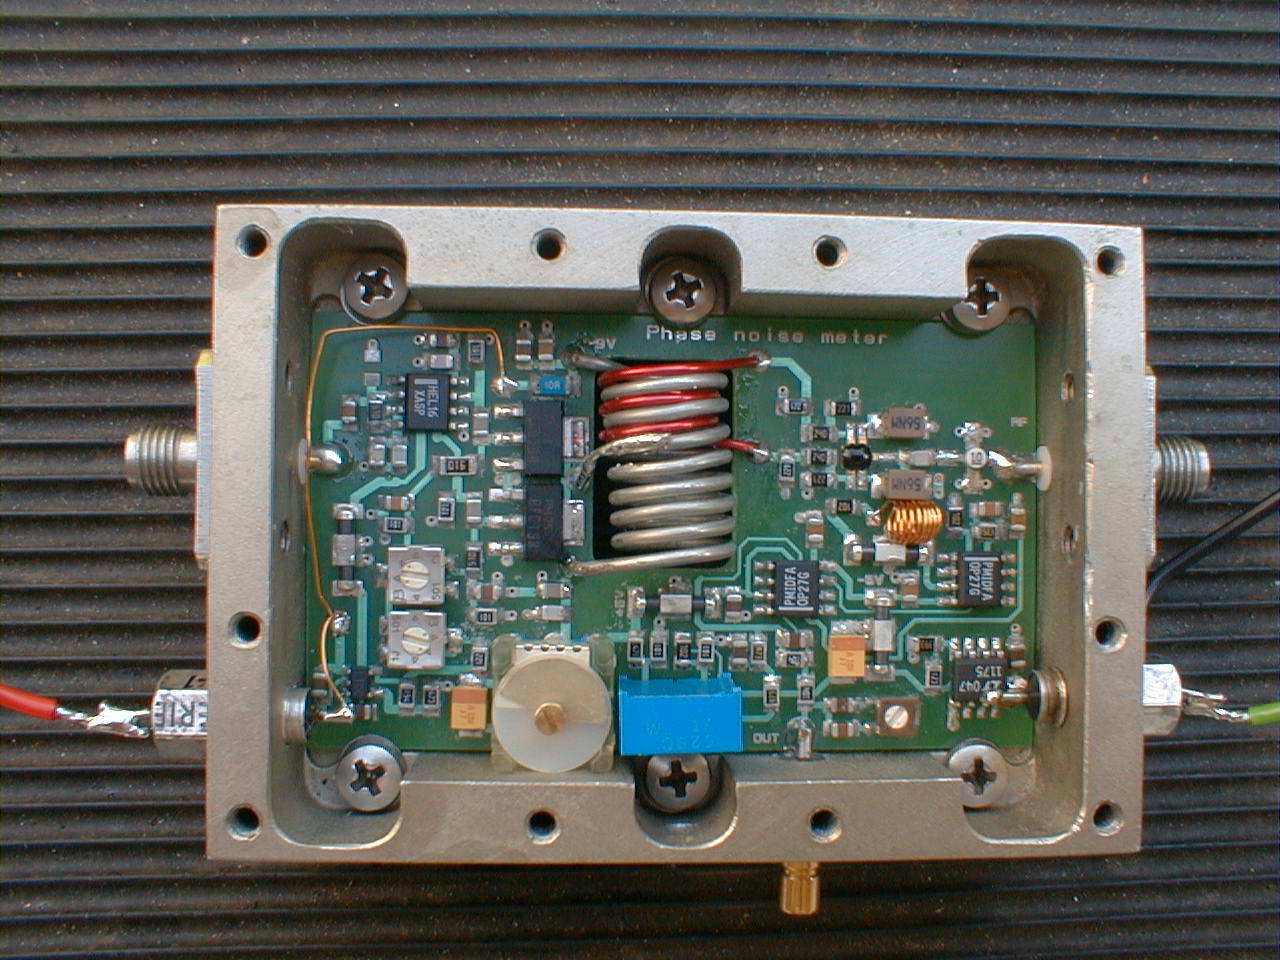 view of the DC phasemeter